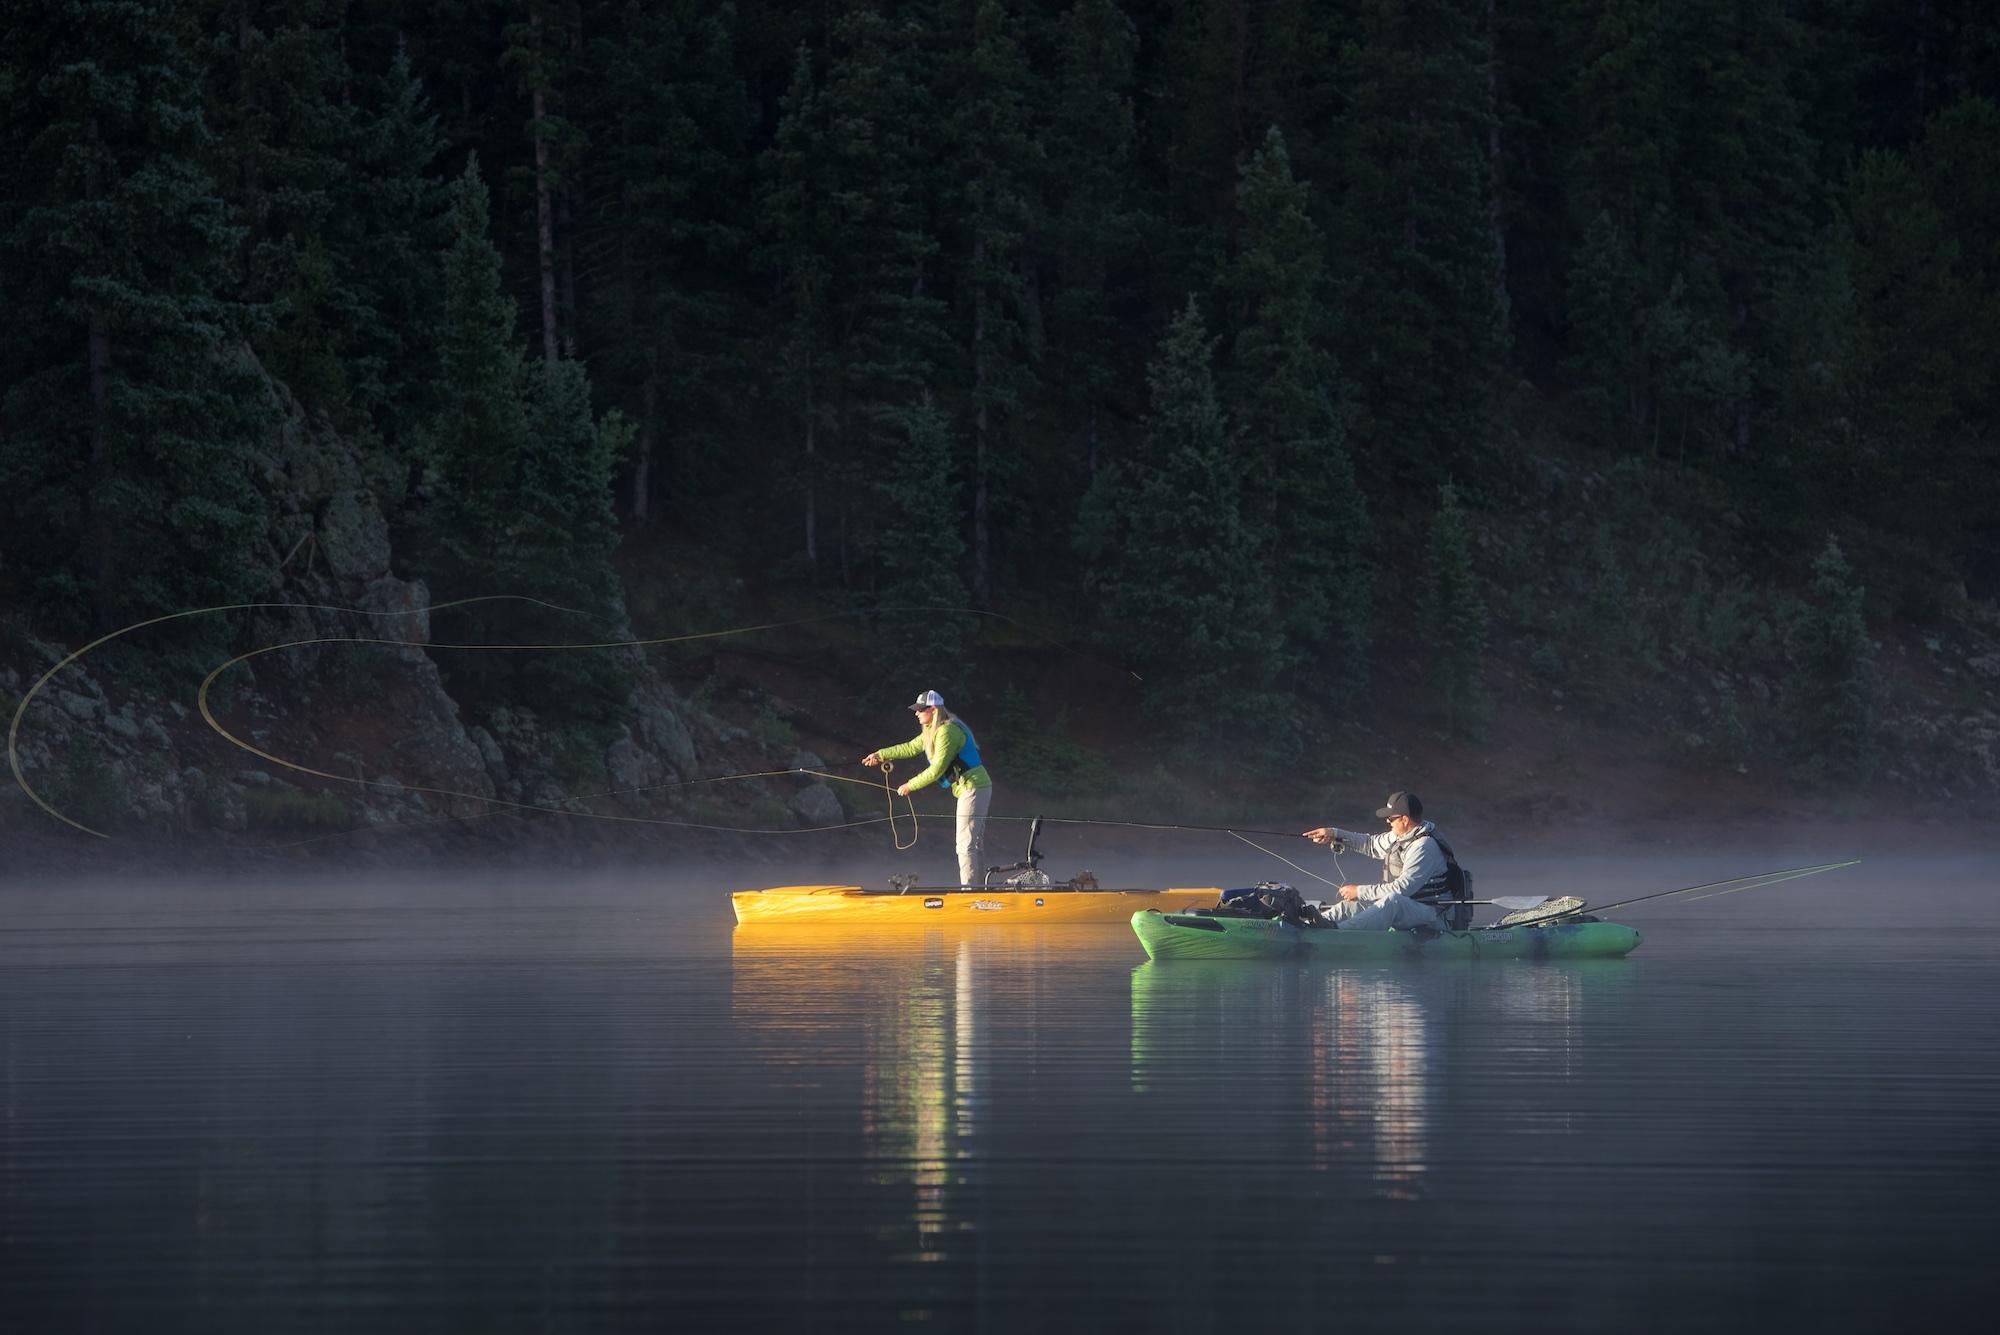 Expert Tips On Fly Fishing From A Kayak